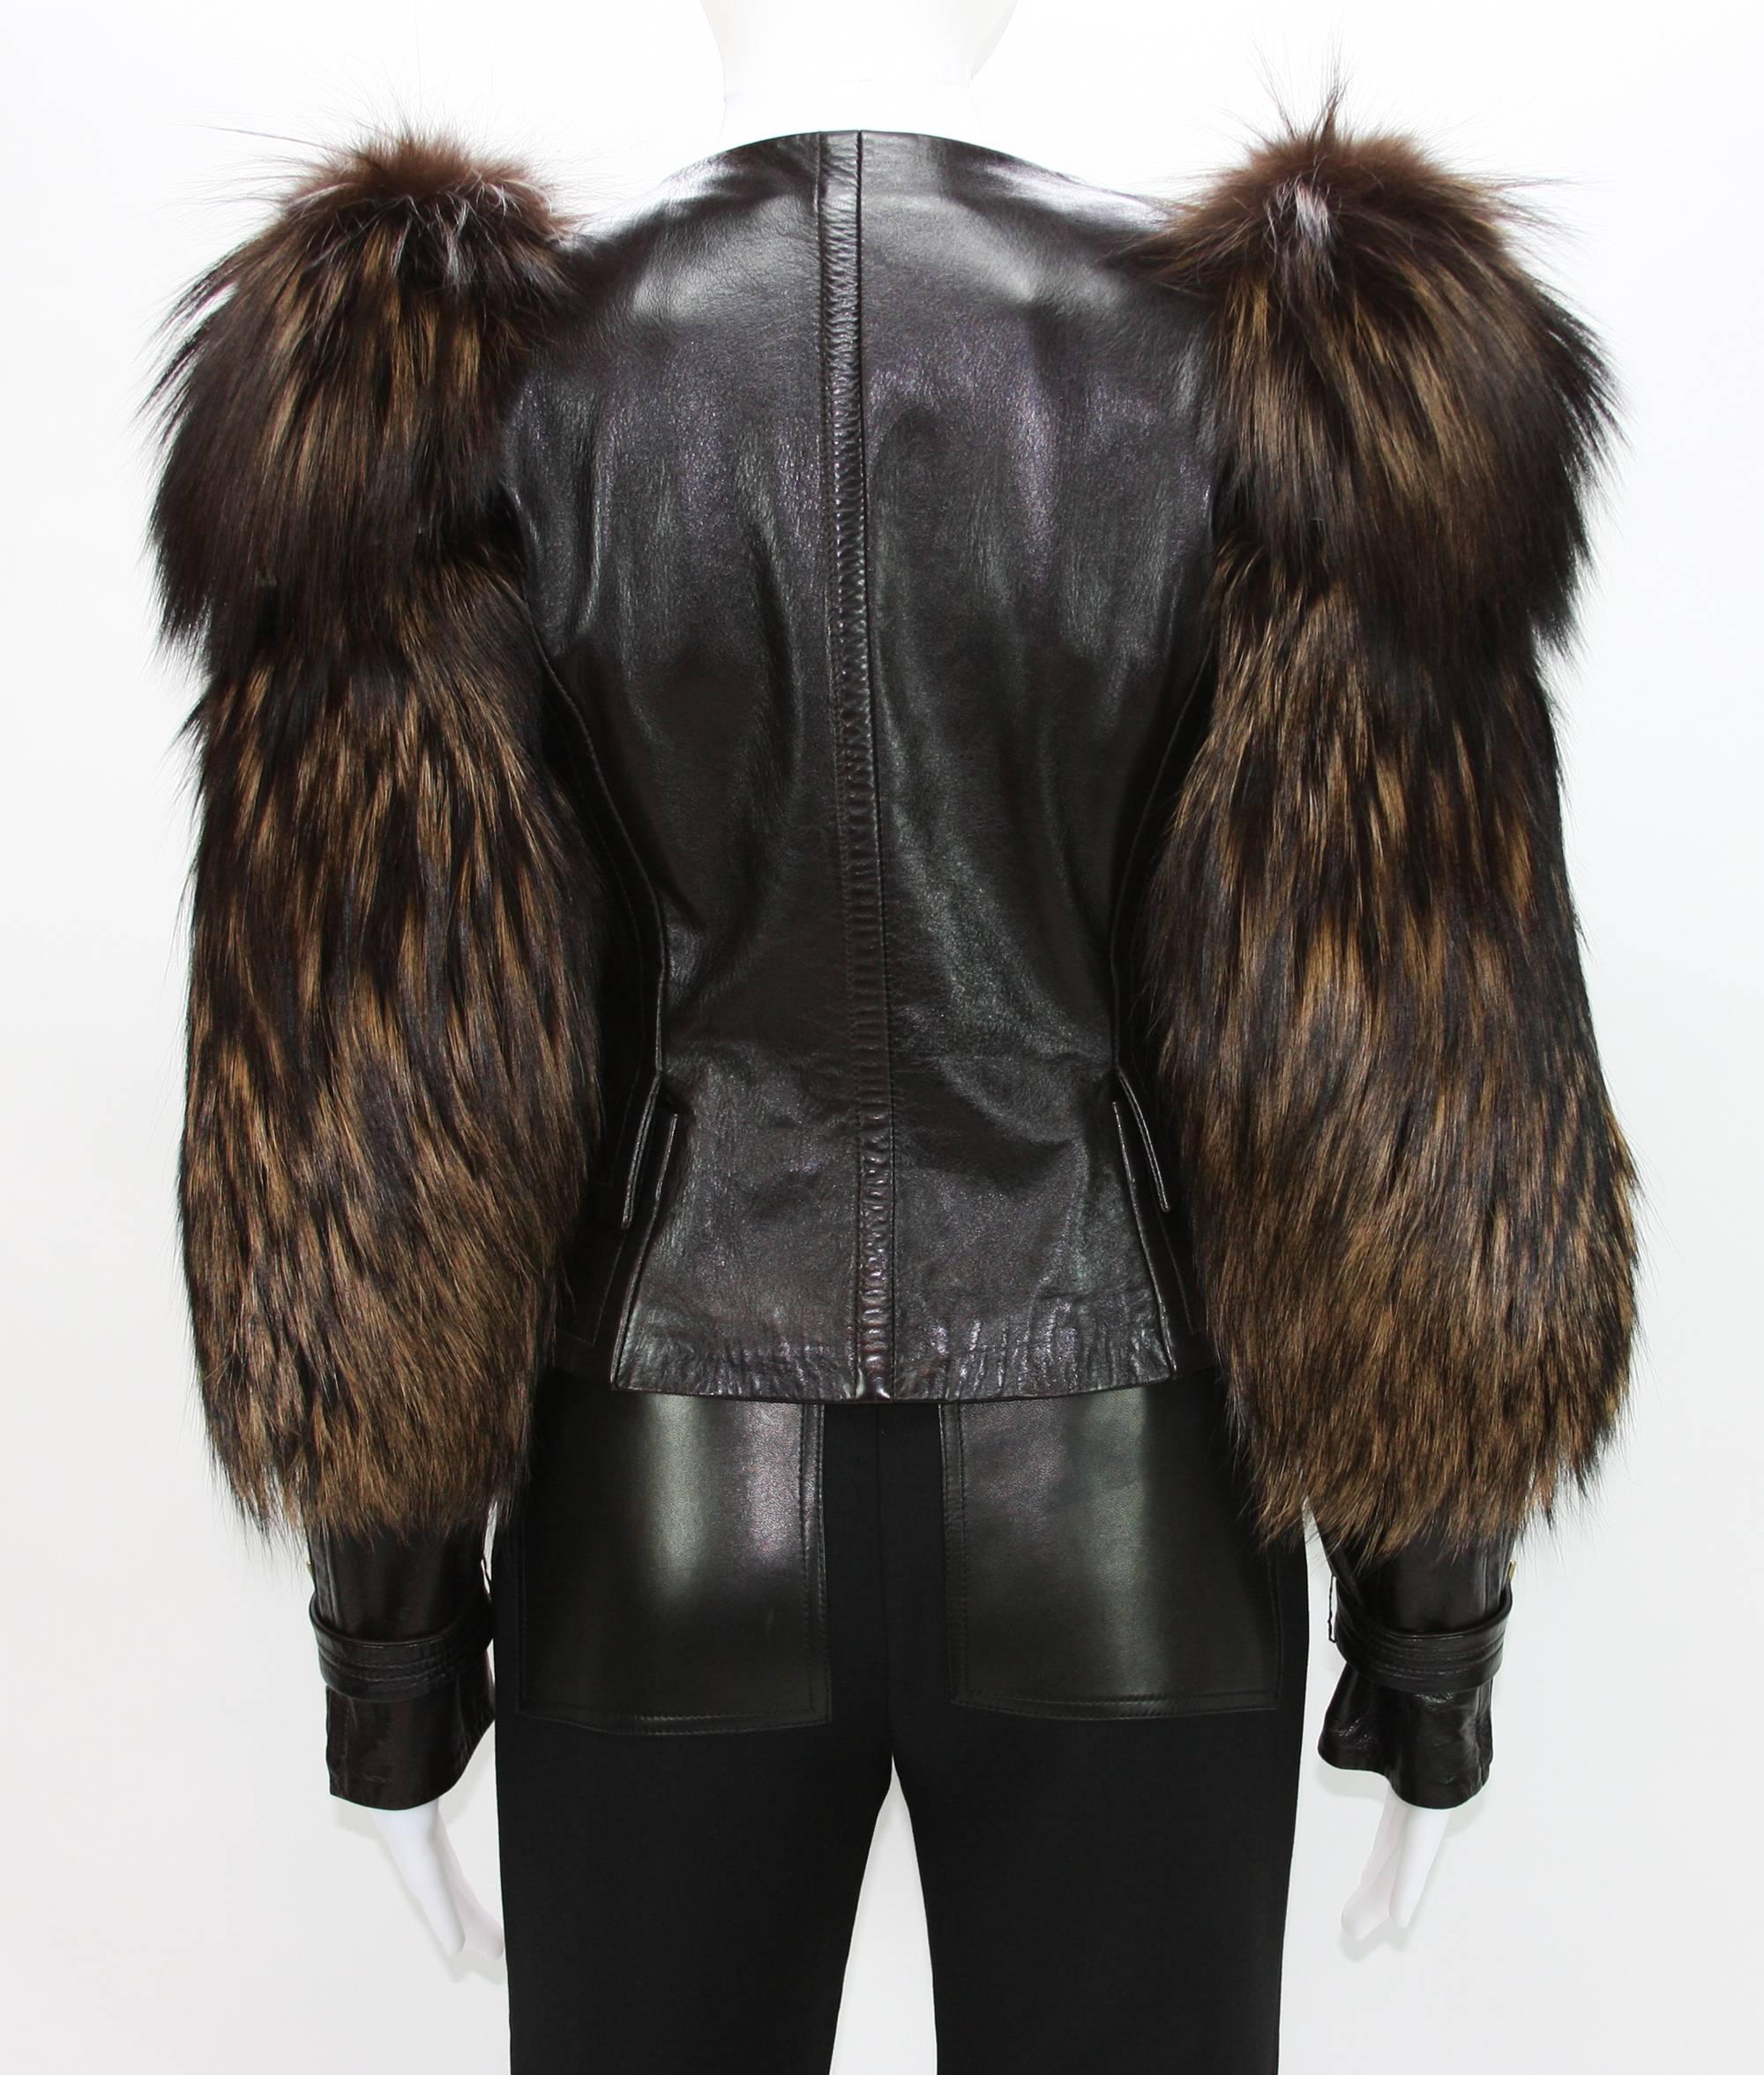 Tom Ford for Gucci Fox Fur Leather Jacket
F/W 2003 Runway Collection
Italian size 38 
Color - Brown, 100% Real Fox , 100% Leather (super soft)
Front Button Closure, Two Front Pockets
Adjustable Side Straps on Sleeves - Close to Shoulders and on